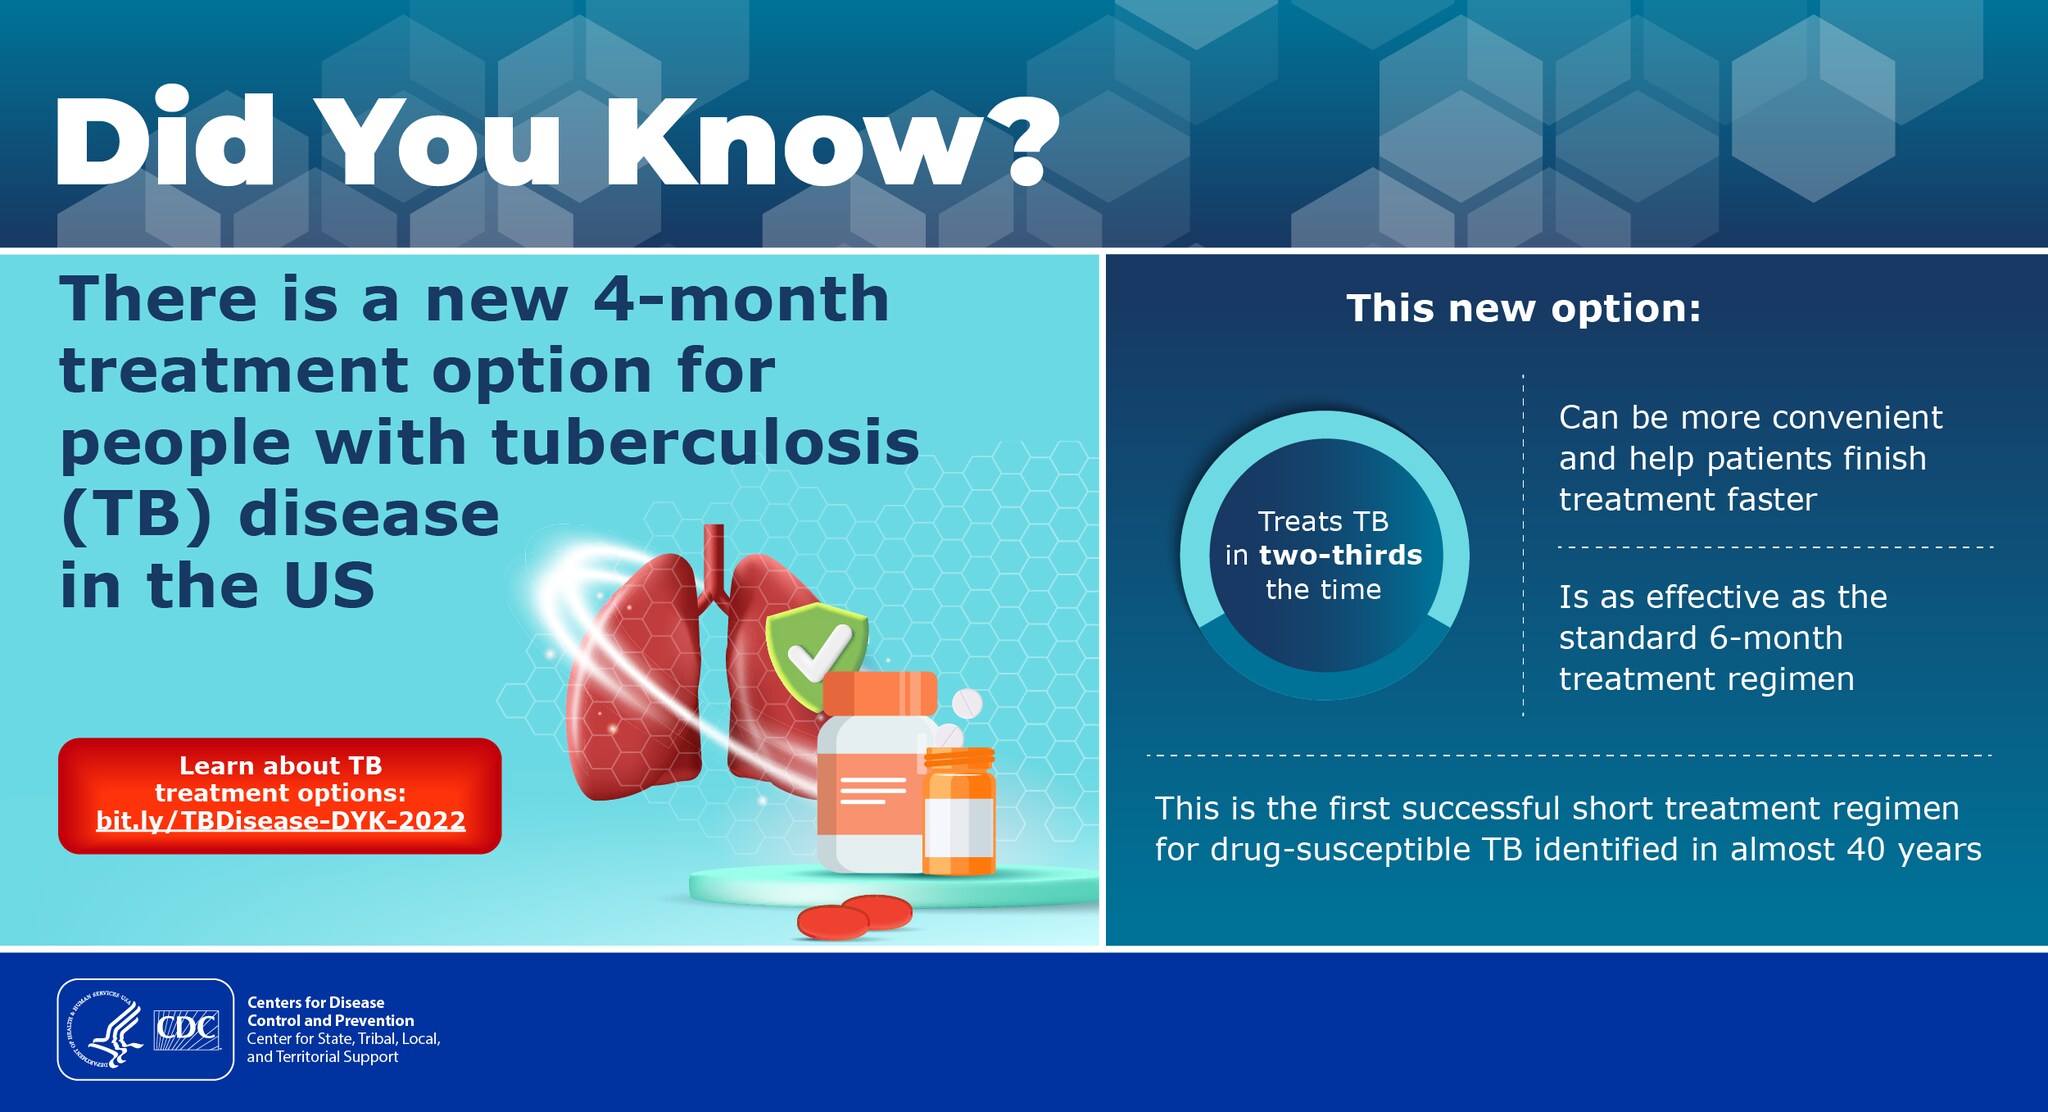 An infographic titled Did You Know? with an illustration of lungs, medication bottles, and medication. Text says “There is a new 4-month treatment option for people with tuberculosis (TB) disease in the US. This new option: treats TB in two-thirds the time; can be more convenient and help patients finish treatment faster; and is as effective as the standard 6-month treatment regimen. This is the first successful short treatment regimen for drug-susceptible TB identified in almost 40 years. Learn more about TB treatment options: https://bit.ly/TBDisease-DYK-2022”